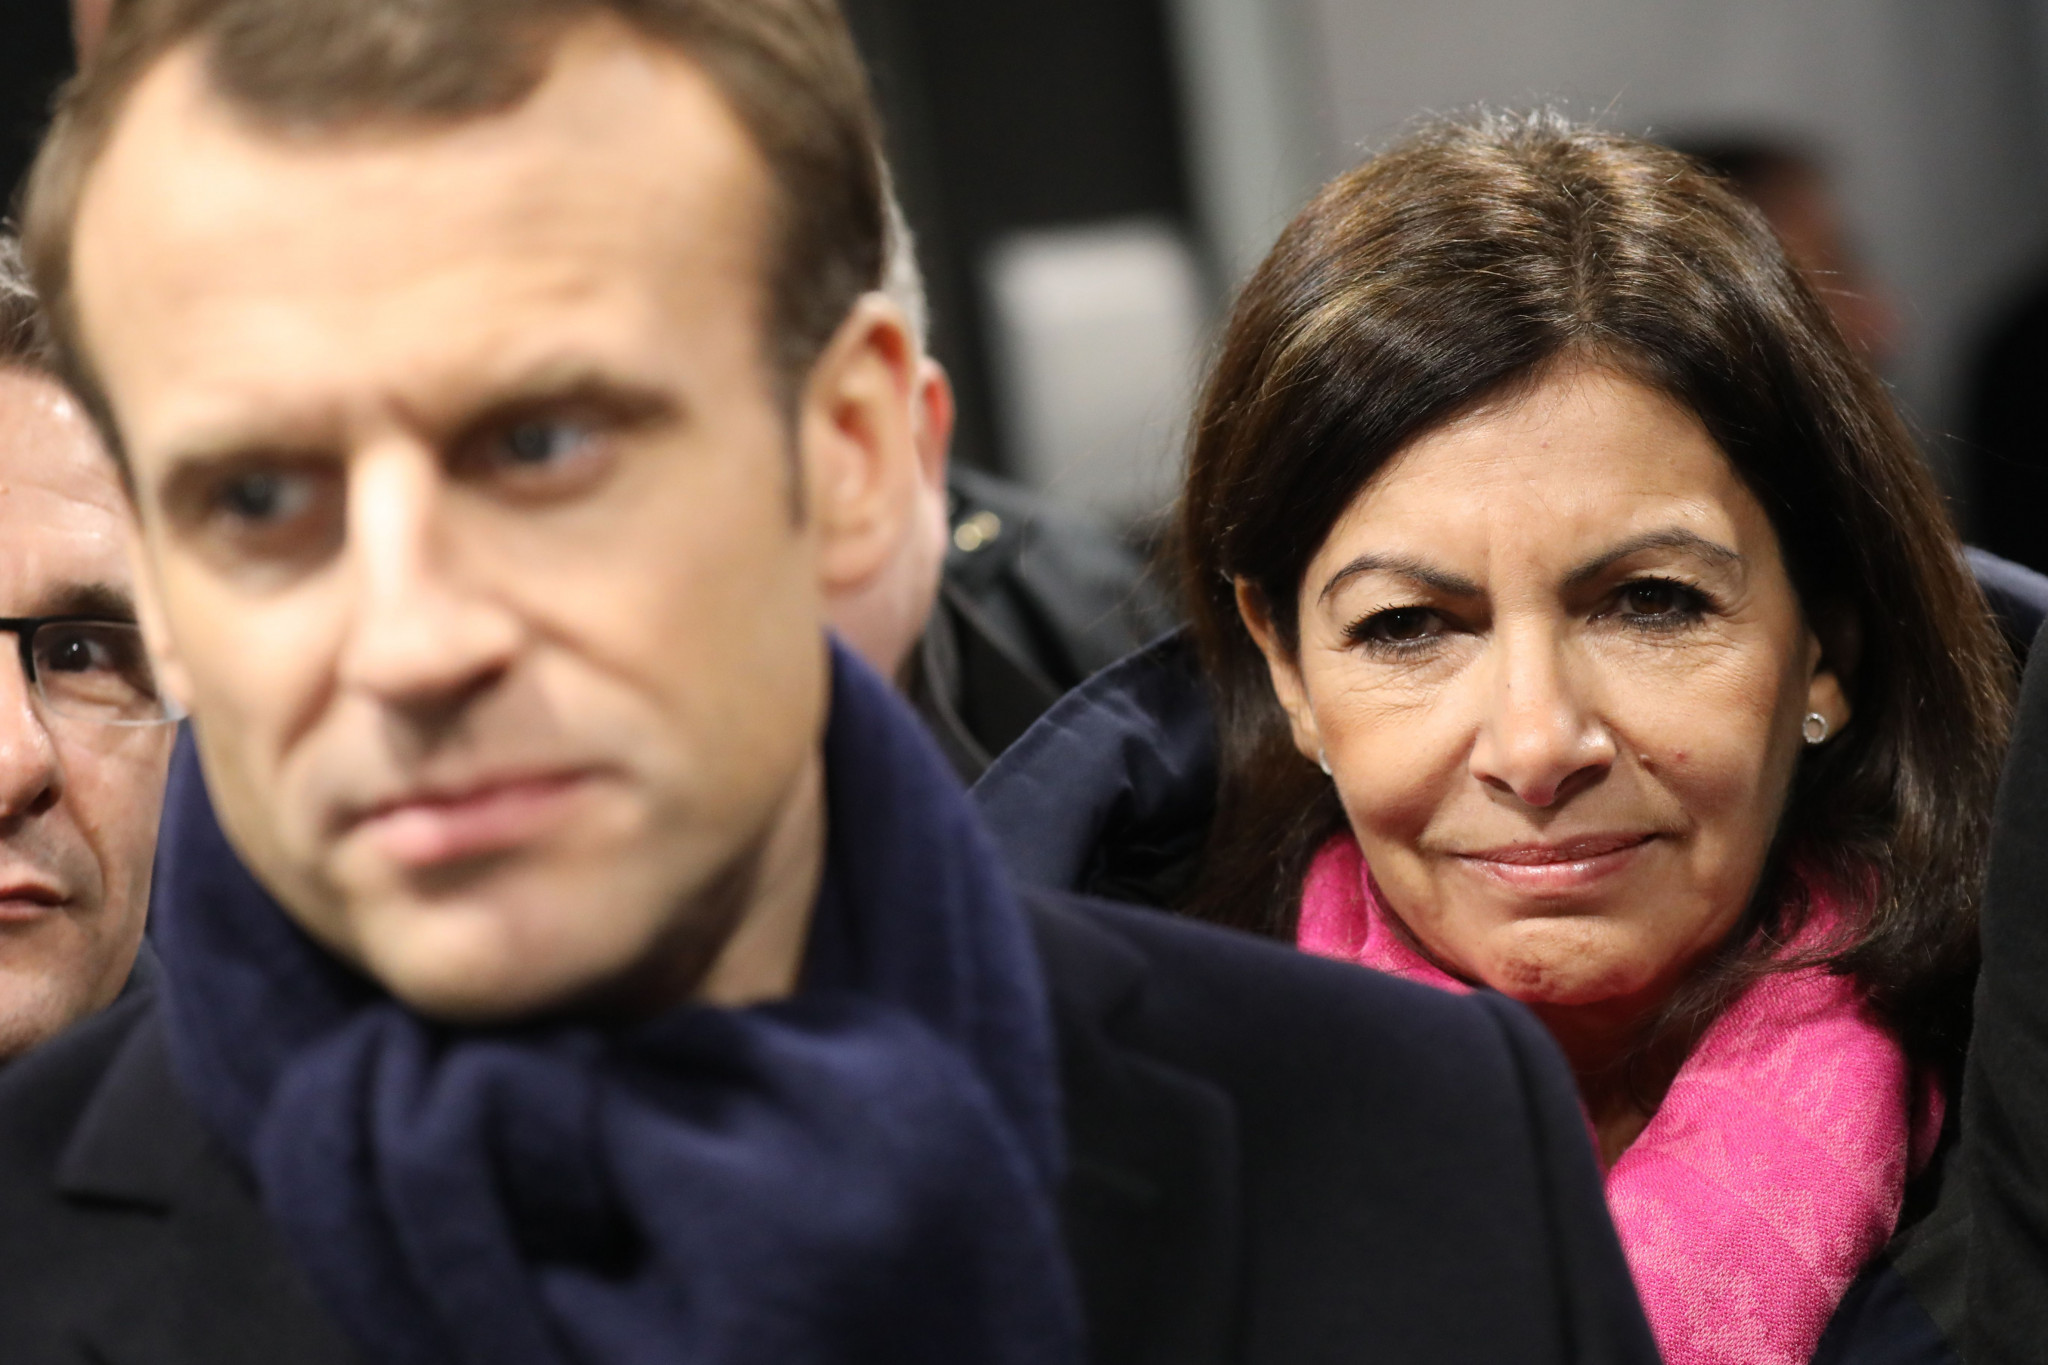 Emmanuel Macron and Anne Hidalgo are involved in a skirmish over Paris 2024 sponsorship money ©Getty Images